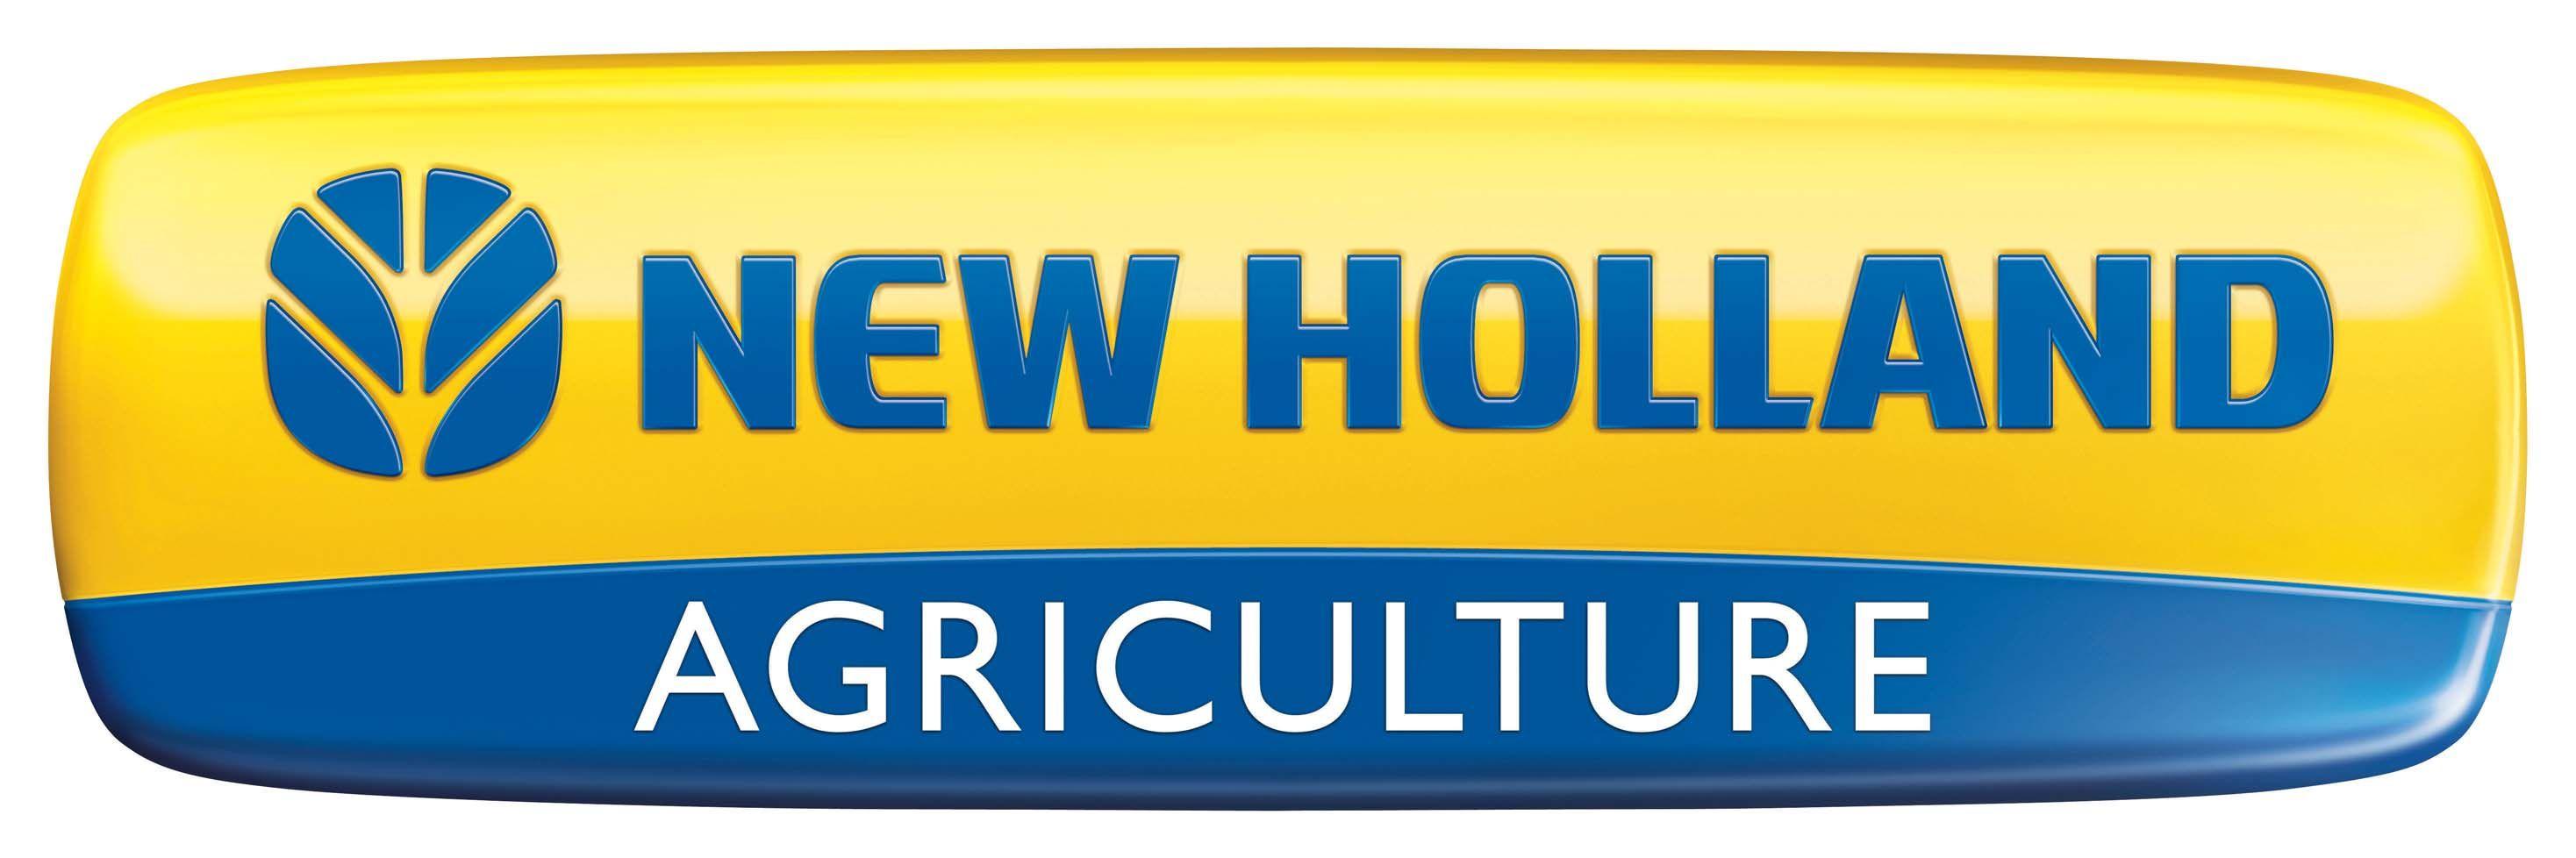 New Holland Tractor Logo - Haynes Agricultural - New Holland - Maidstone, Kent